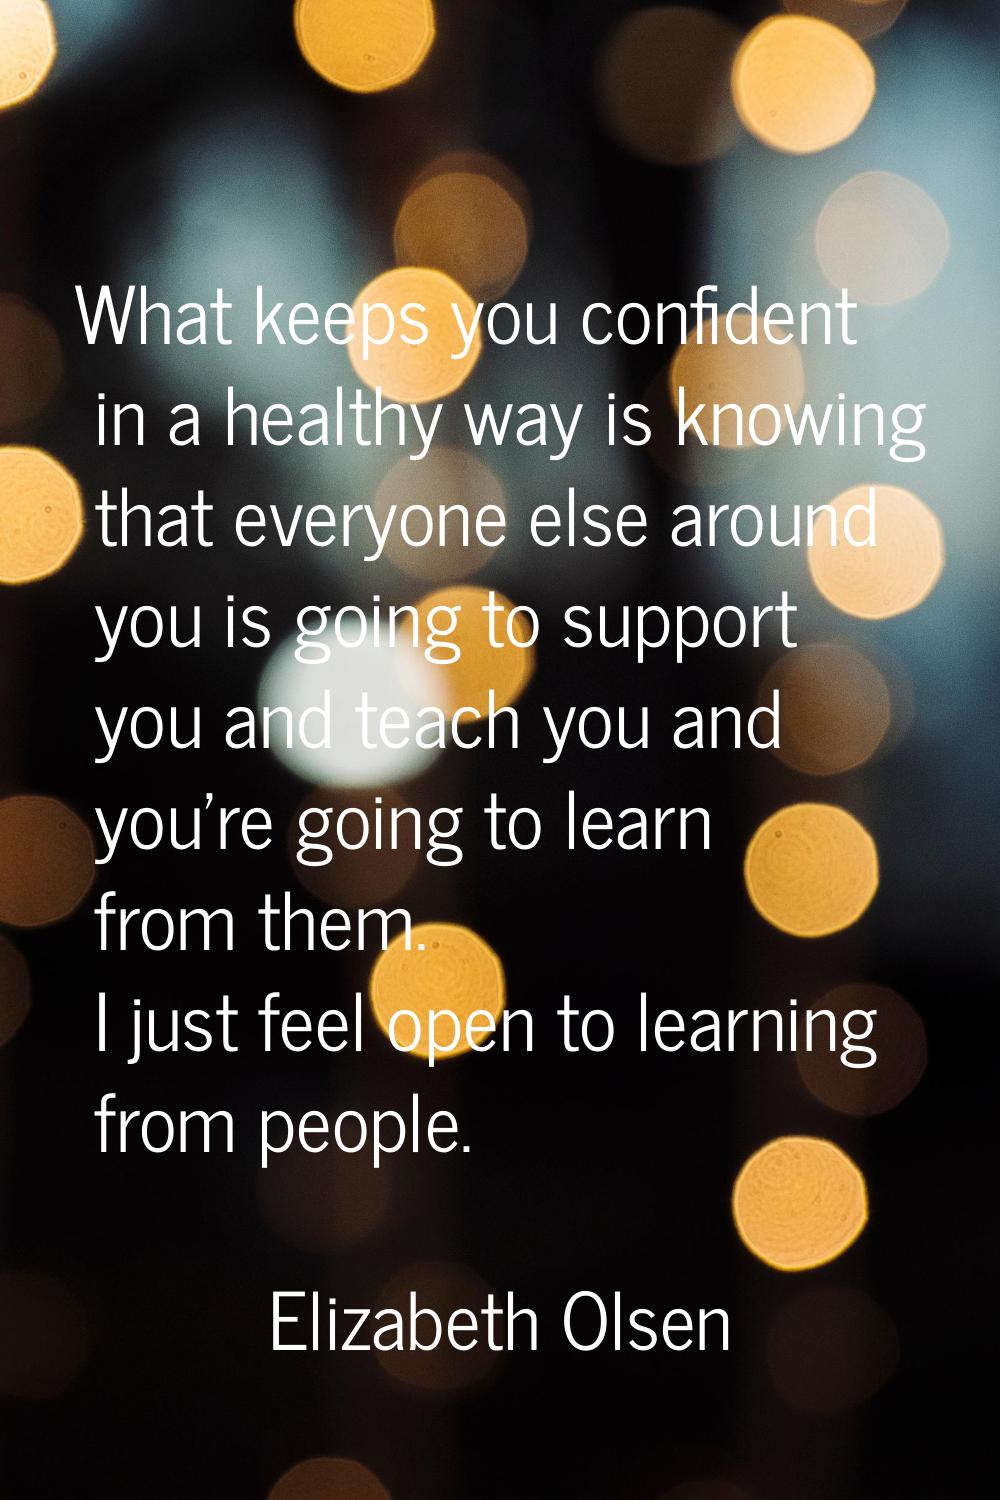 What keeps you confident in a healthy way is knowing that everyone else around you is going to supp